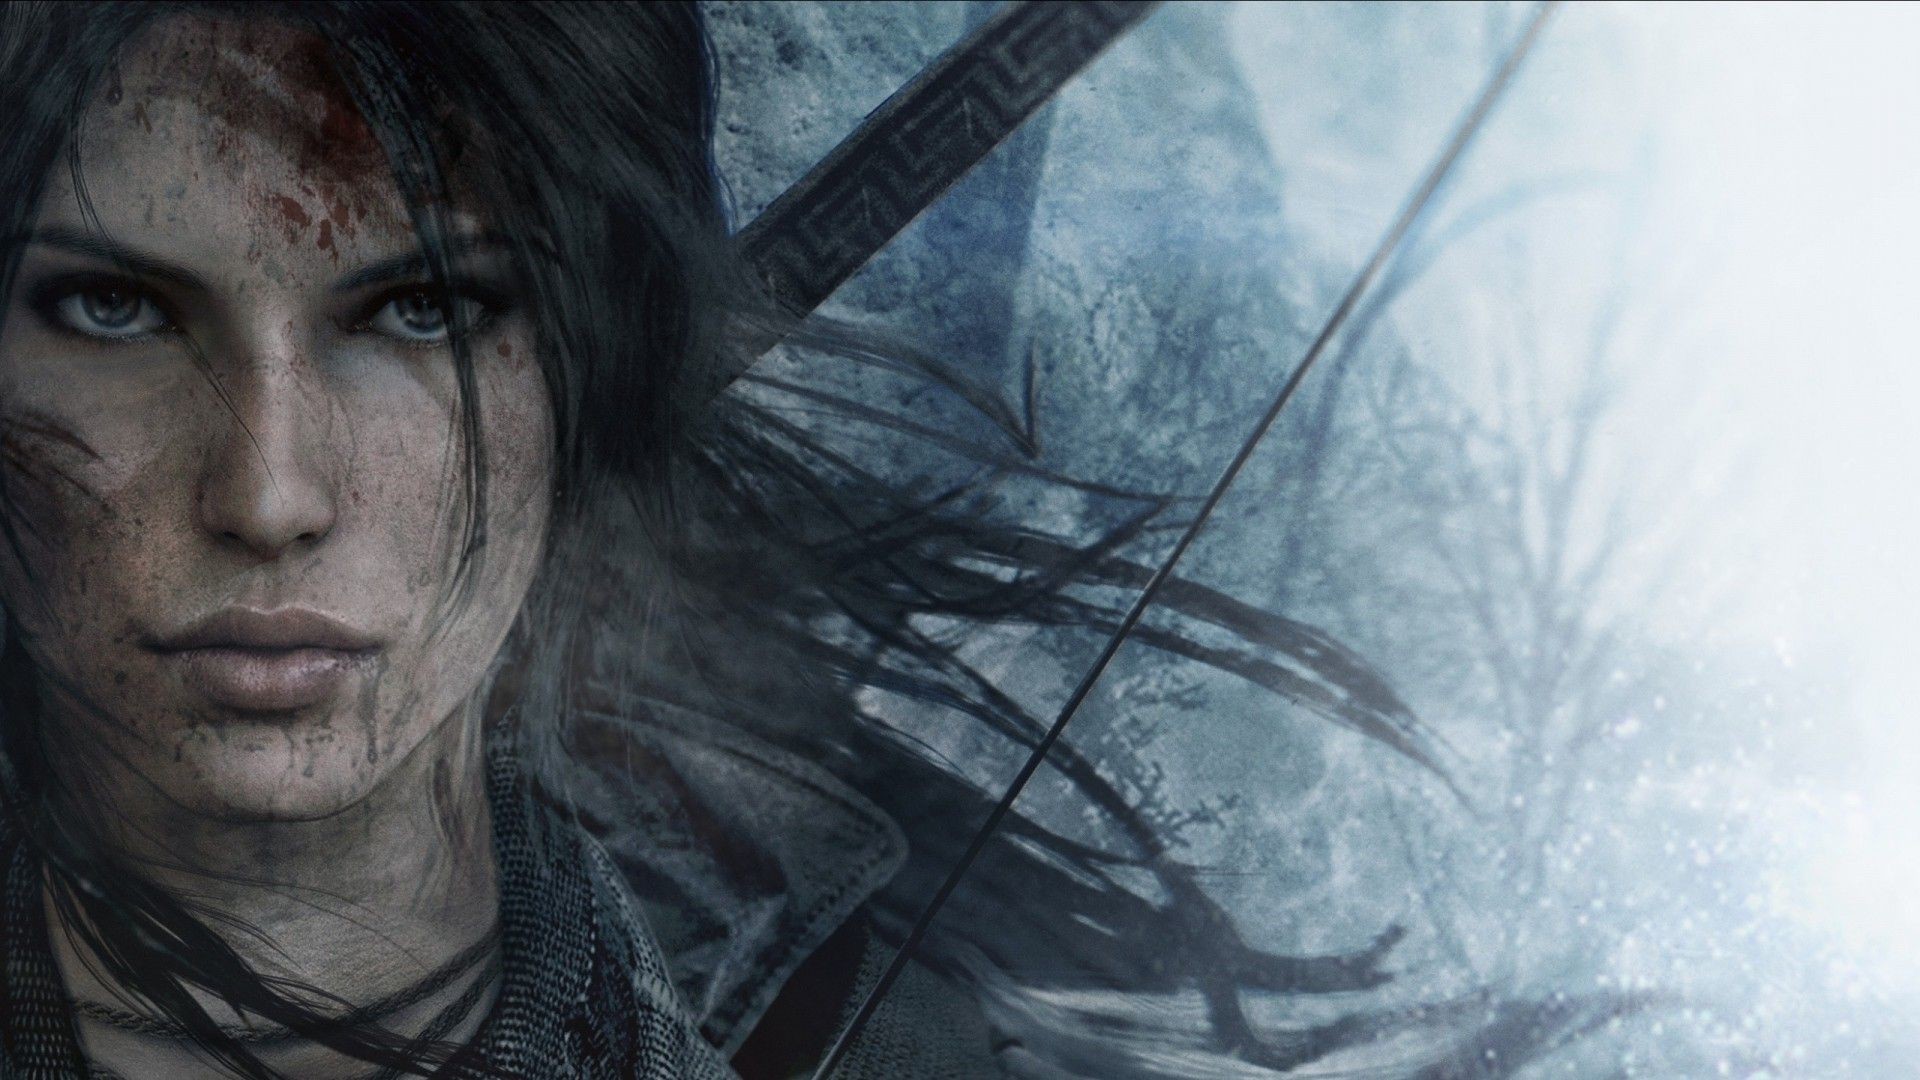 1920x1080 Download hd wallpapers of 267552-Lara Croft, Rise Of The Tomb Raider, Video  Games, Face, Artwork, Concept Art, Bows, Eyes, Tomb Raider.